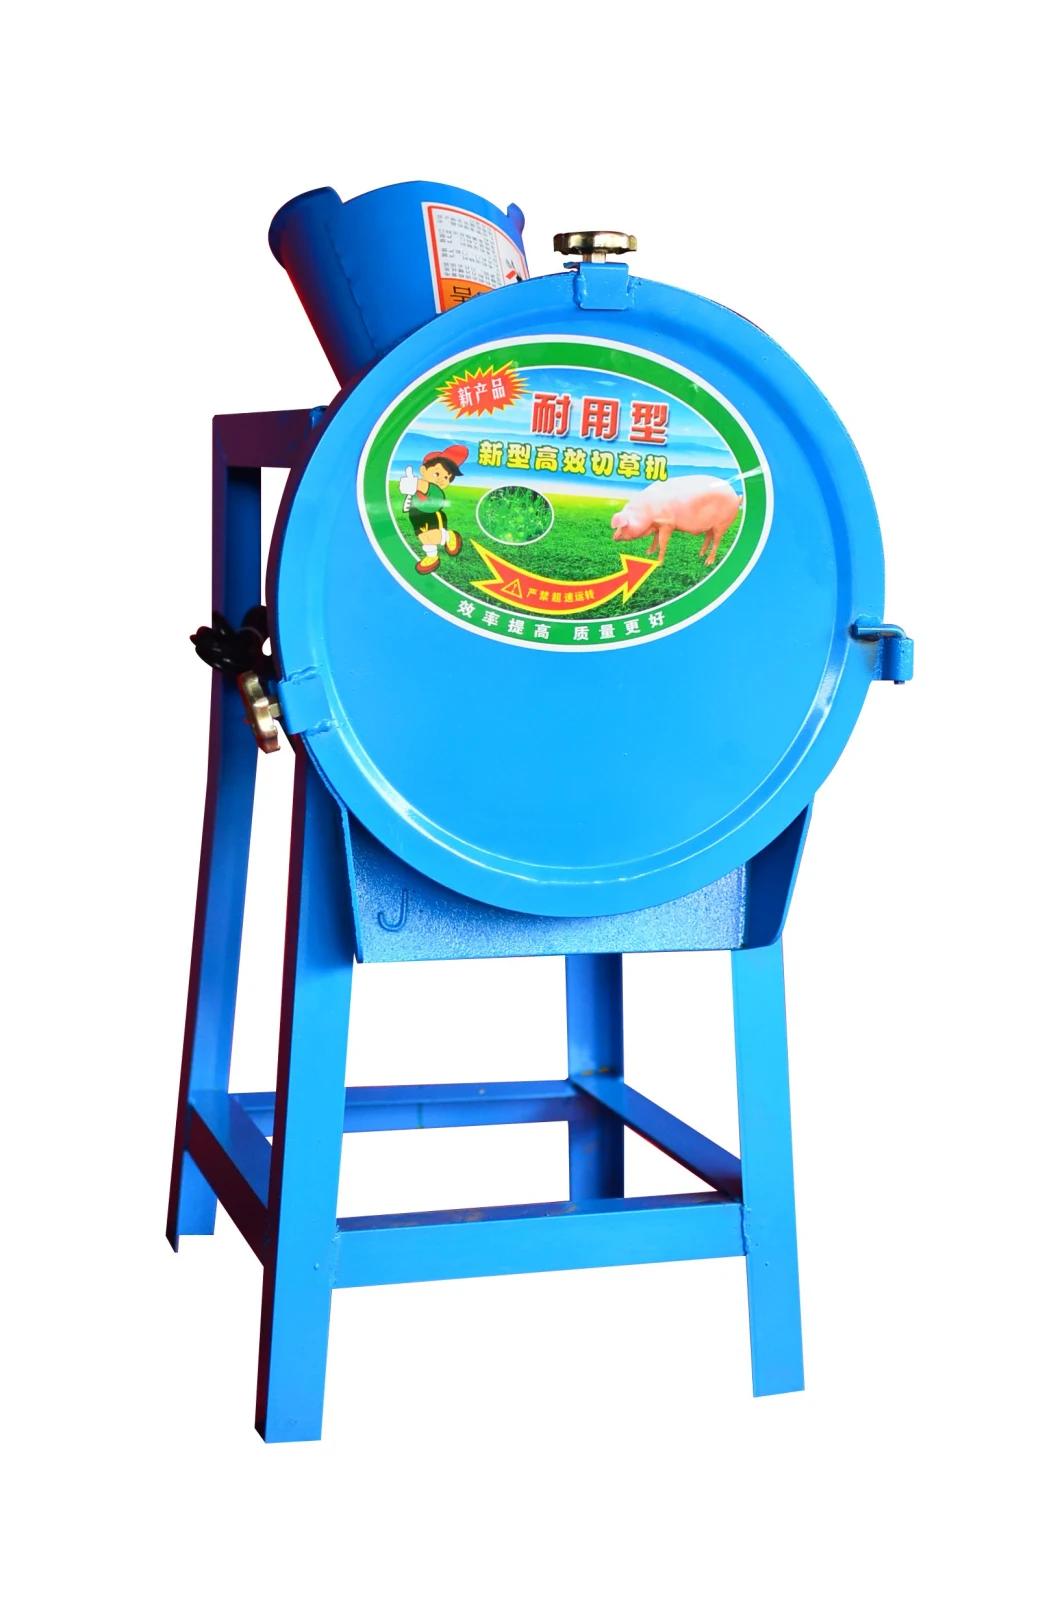 Fodder Cutter Machine for Farm Animal Feeding OEM&ODM Projects Are Available